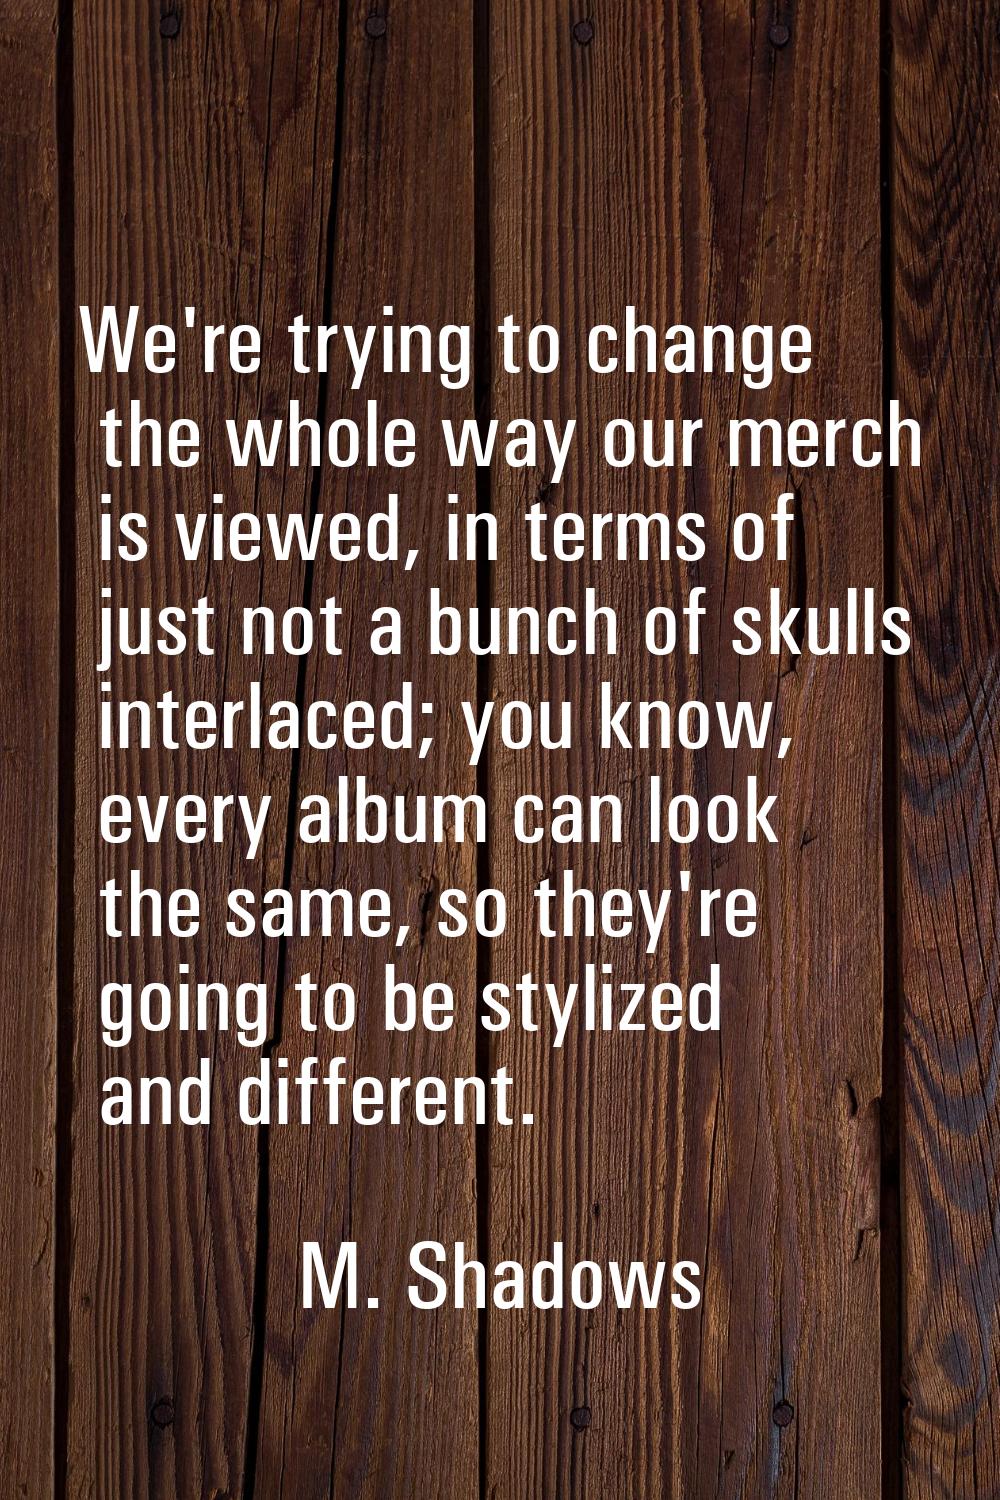 We're trying to change the whole way our merch is viewed, in terms of just not a bunch of skulls in